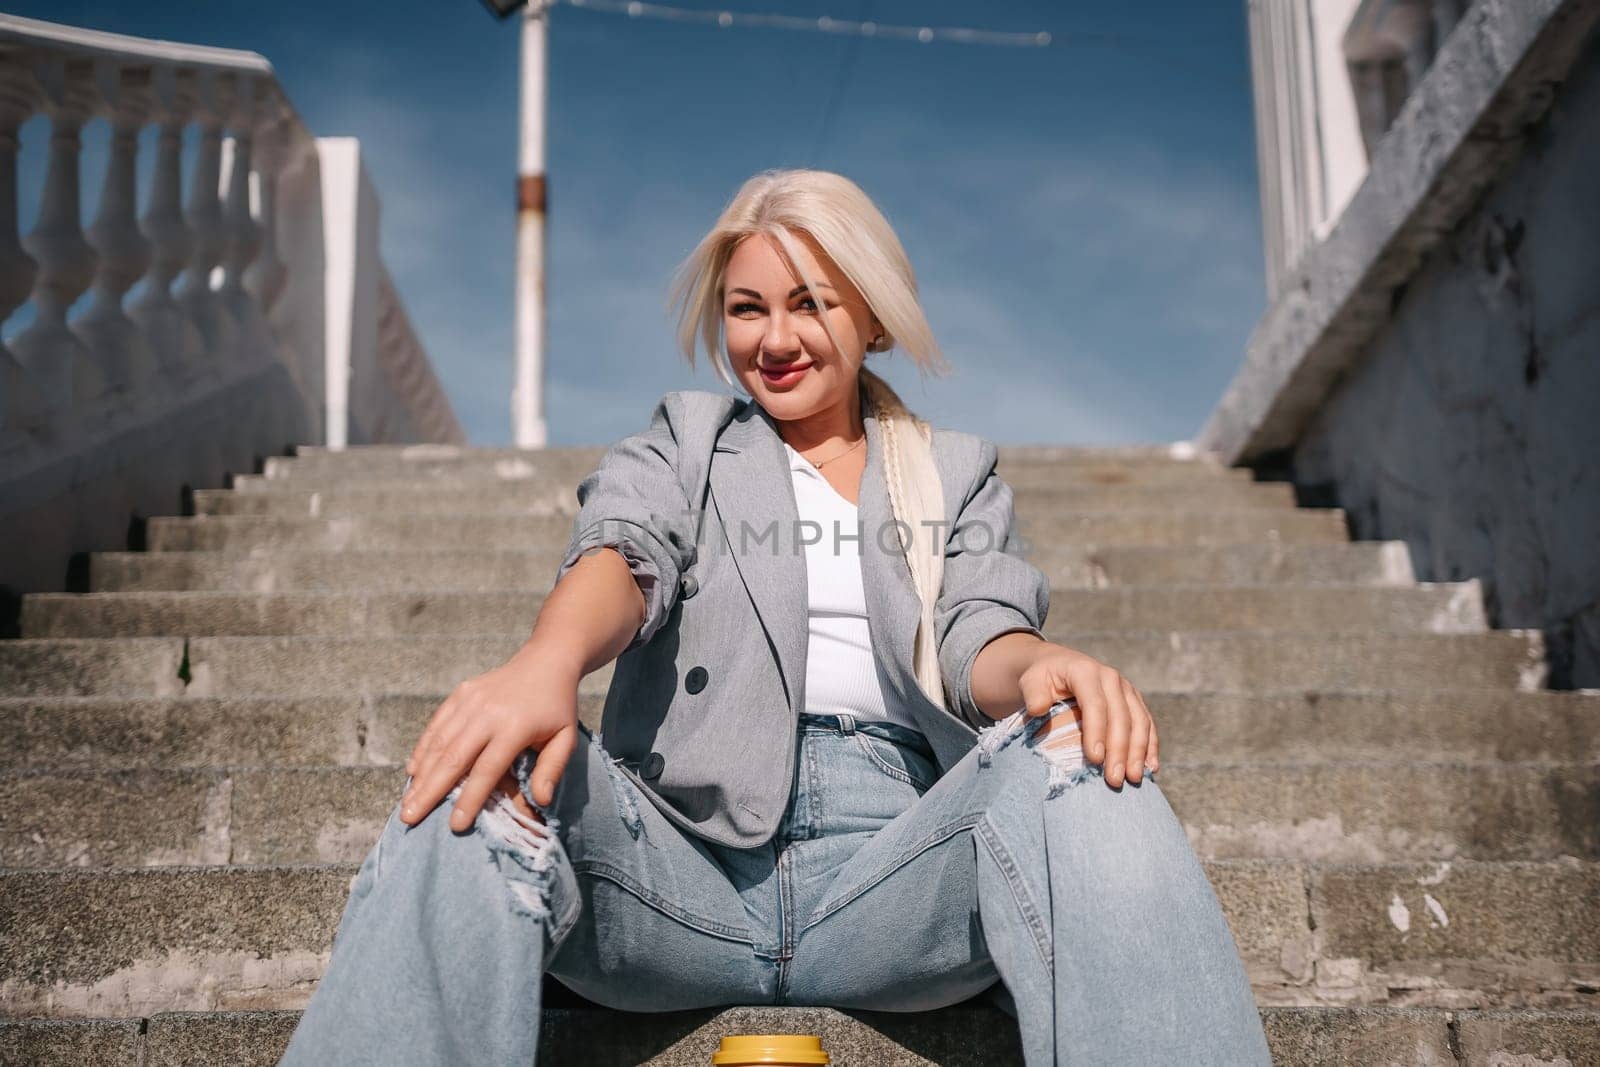 A woman in a gray jacket and blue jeans sits on a set of stairs. She is smiling and she is enjoying herself